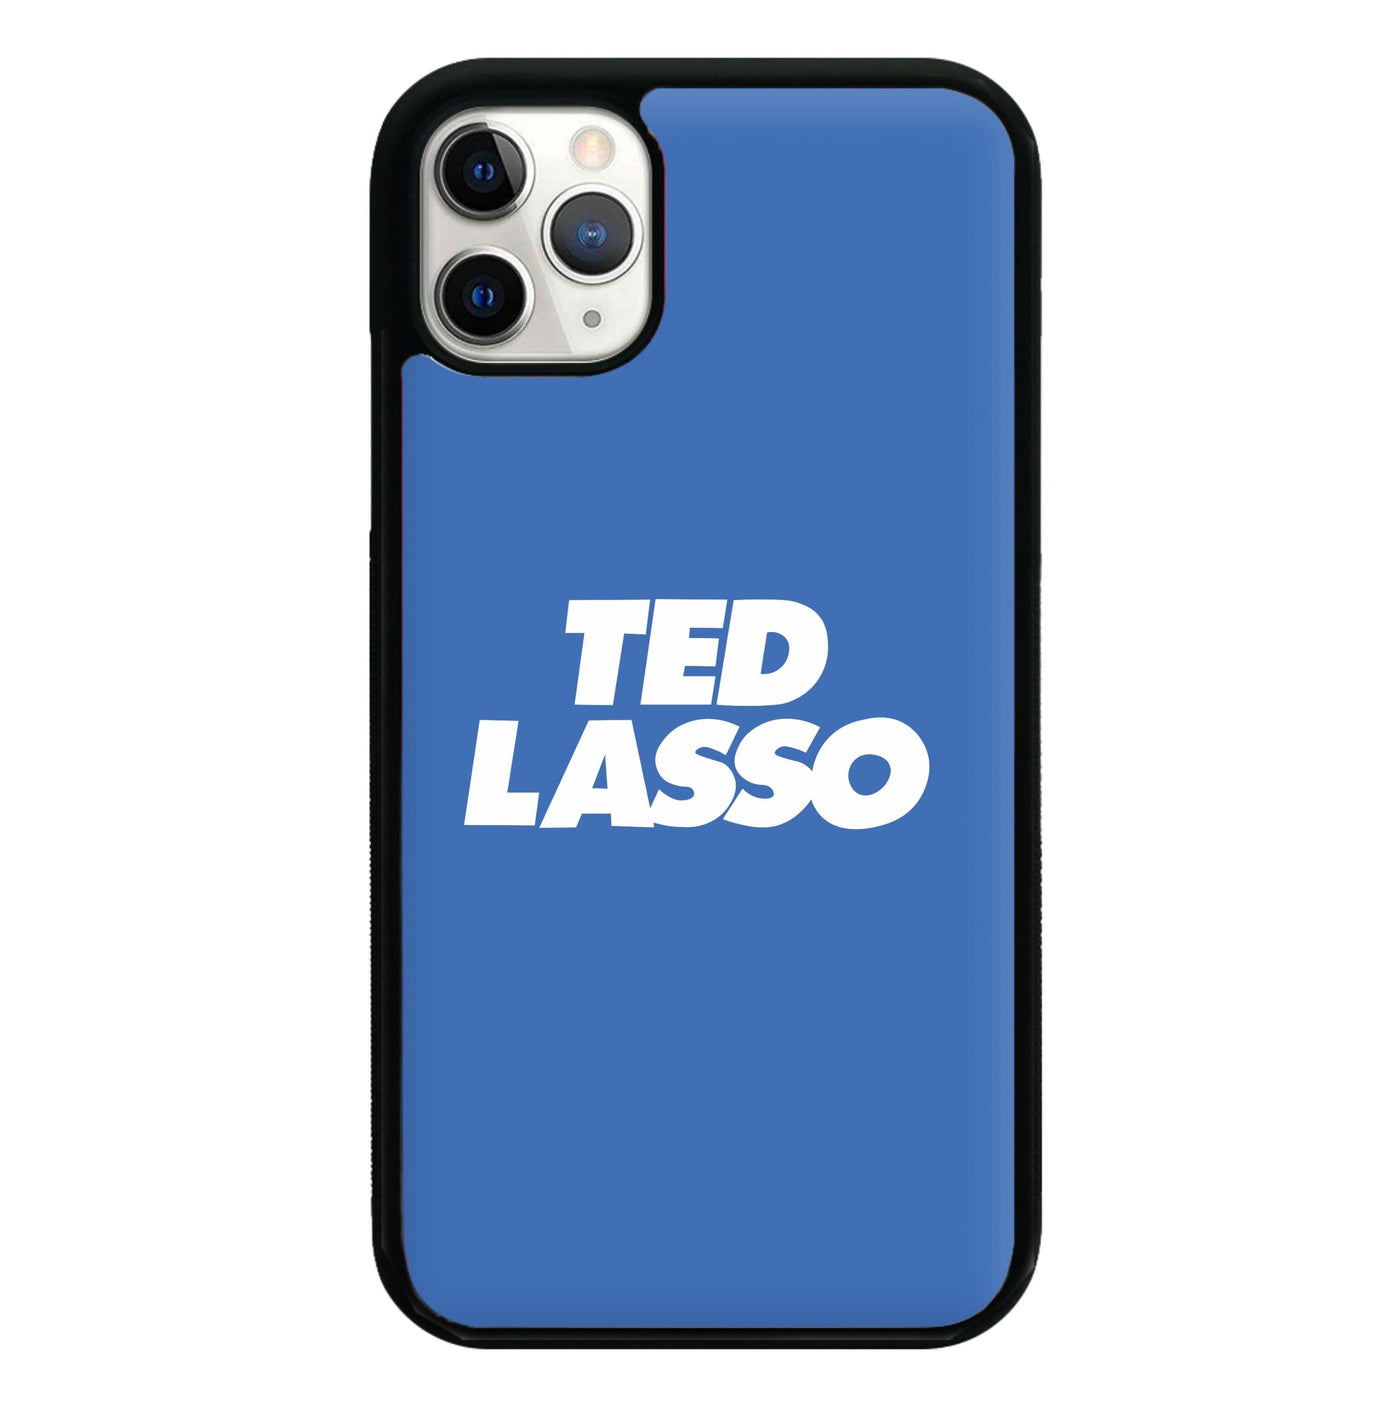 Ted - Ted Lasso Phone Case